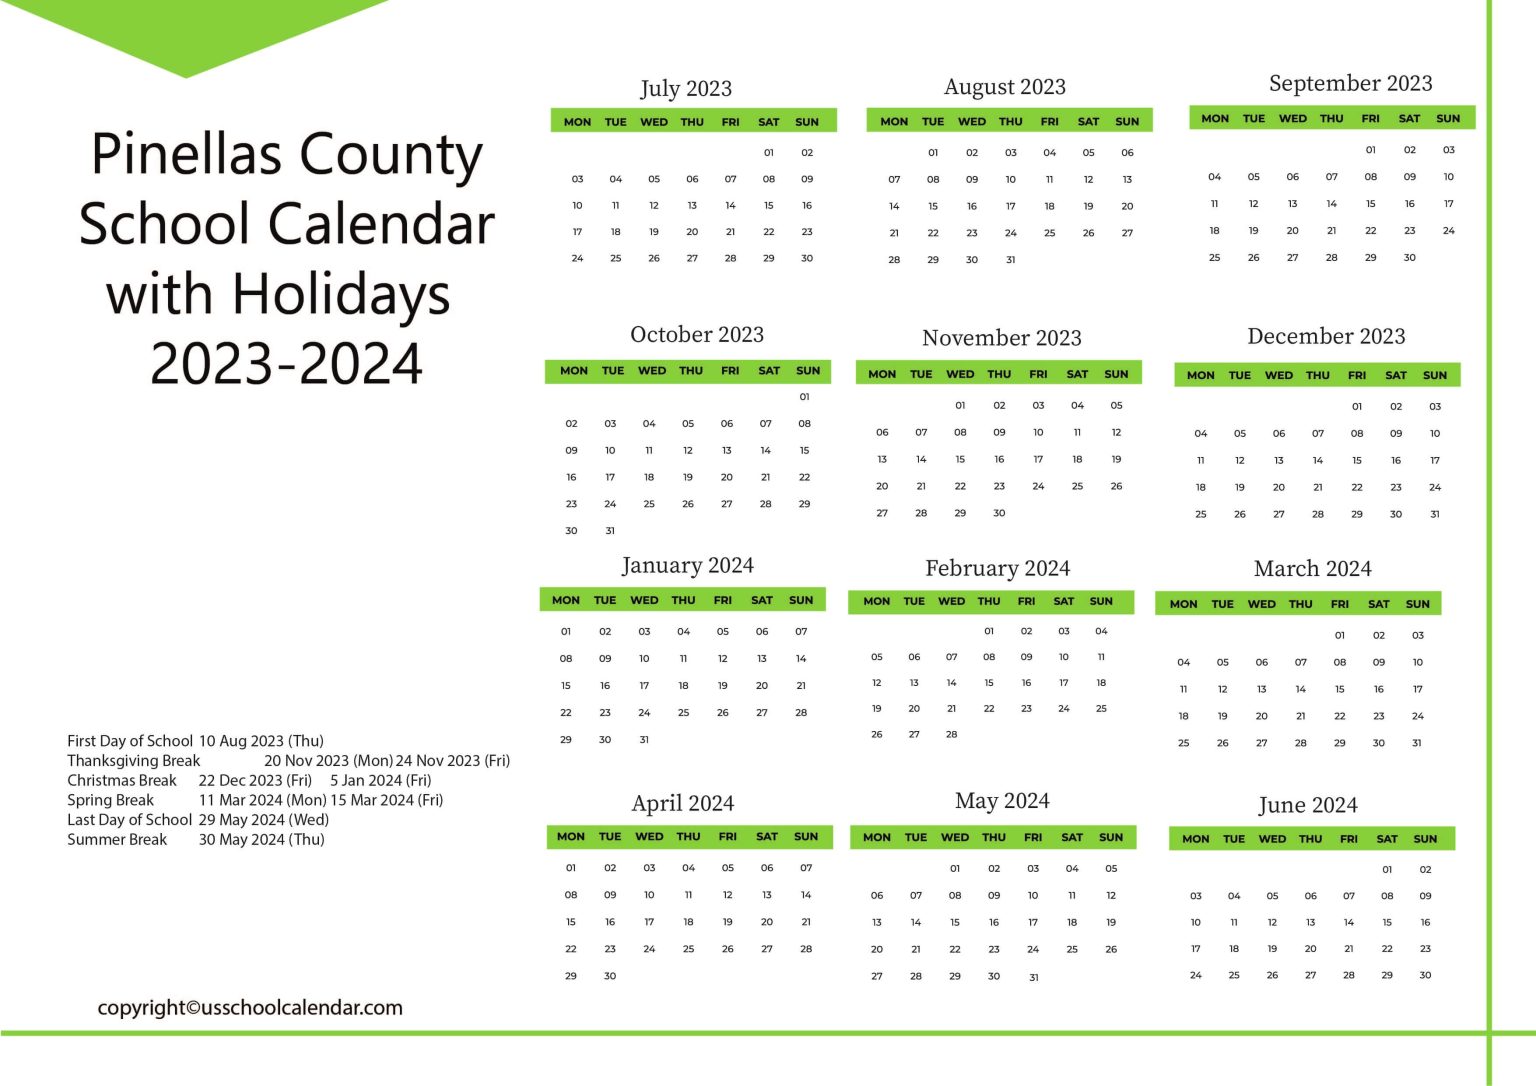 pinellas-county-school-calendar-with-holidays-2023-2024